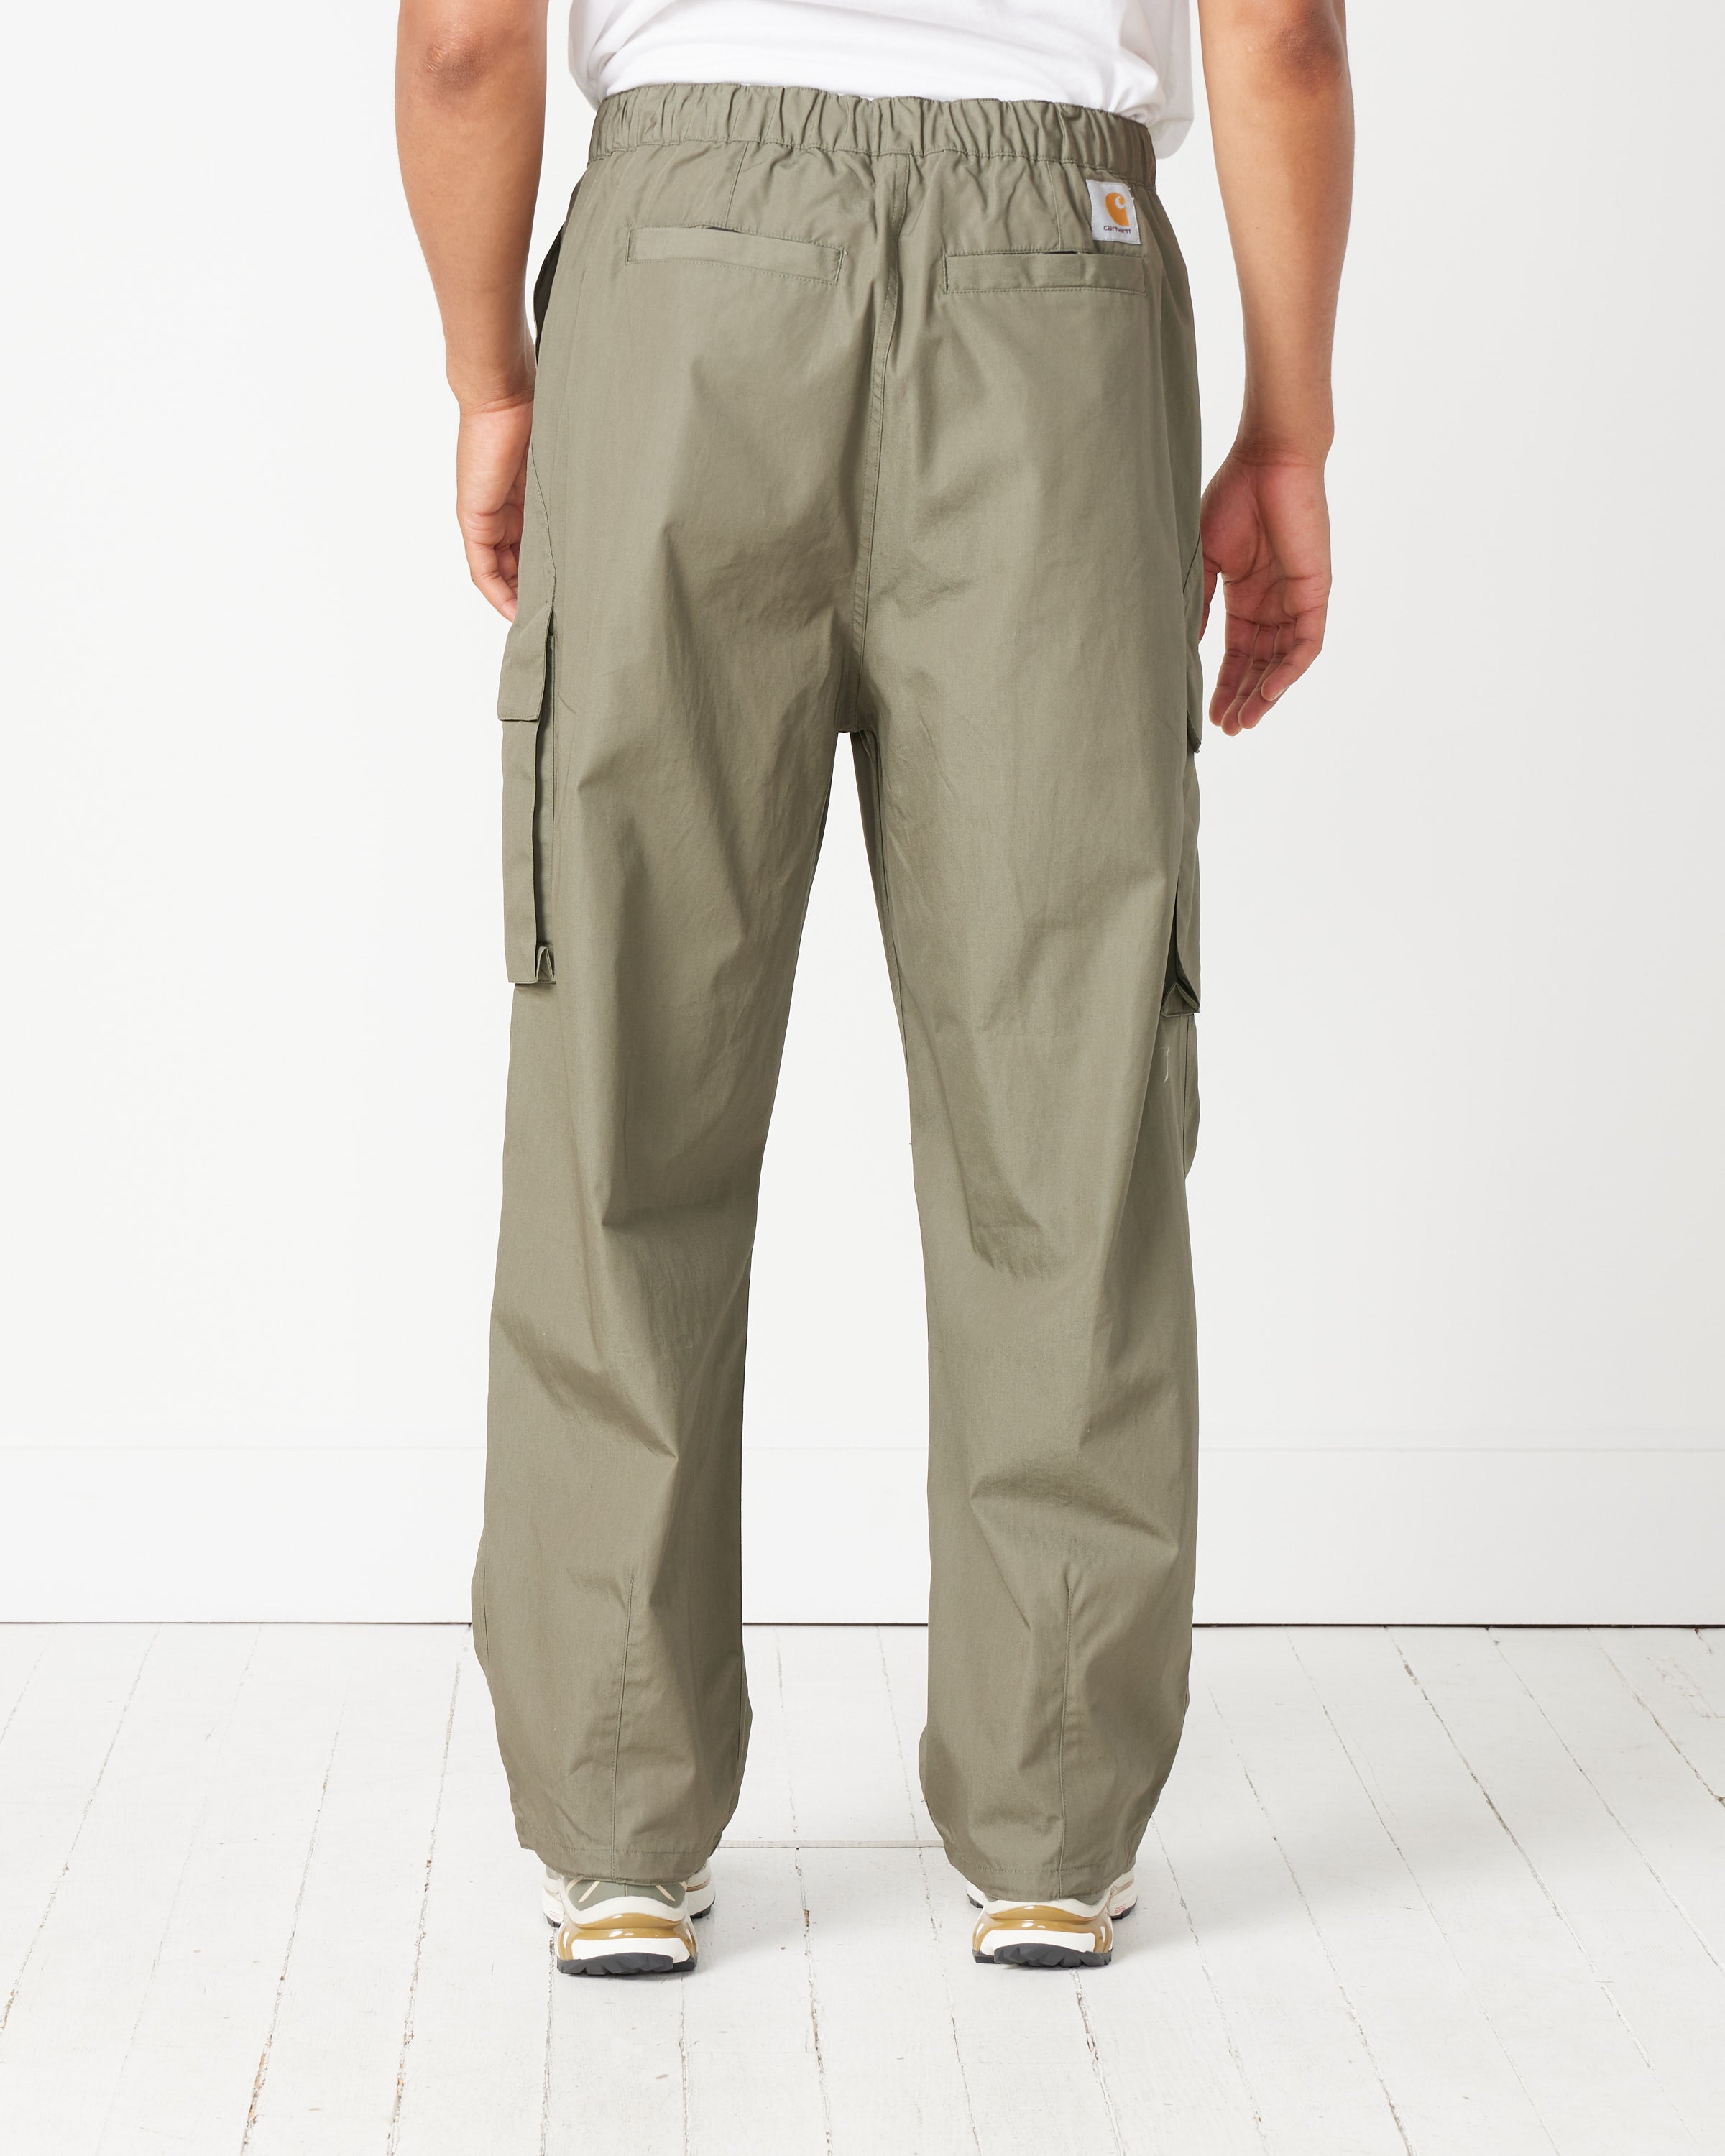 Mohawk General Store | Sillage | Essential Baggy Trousers in 